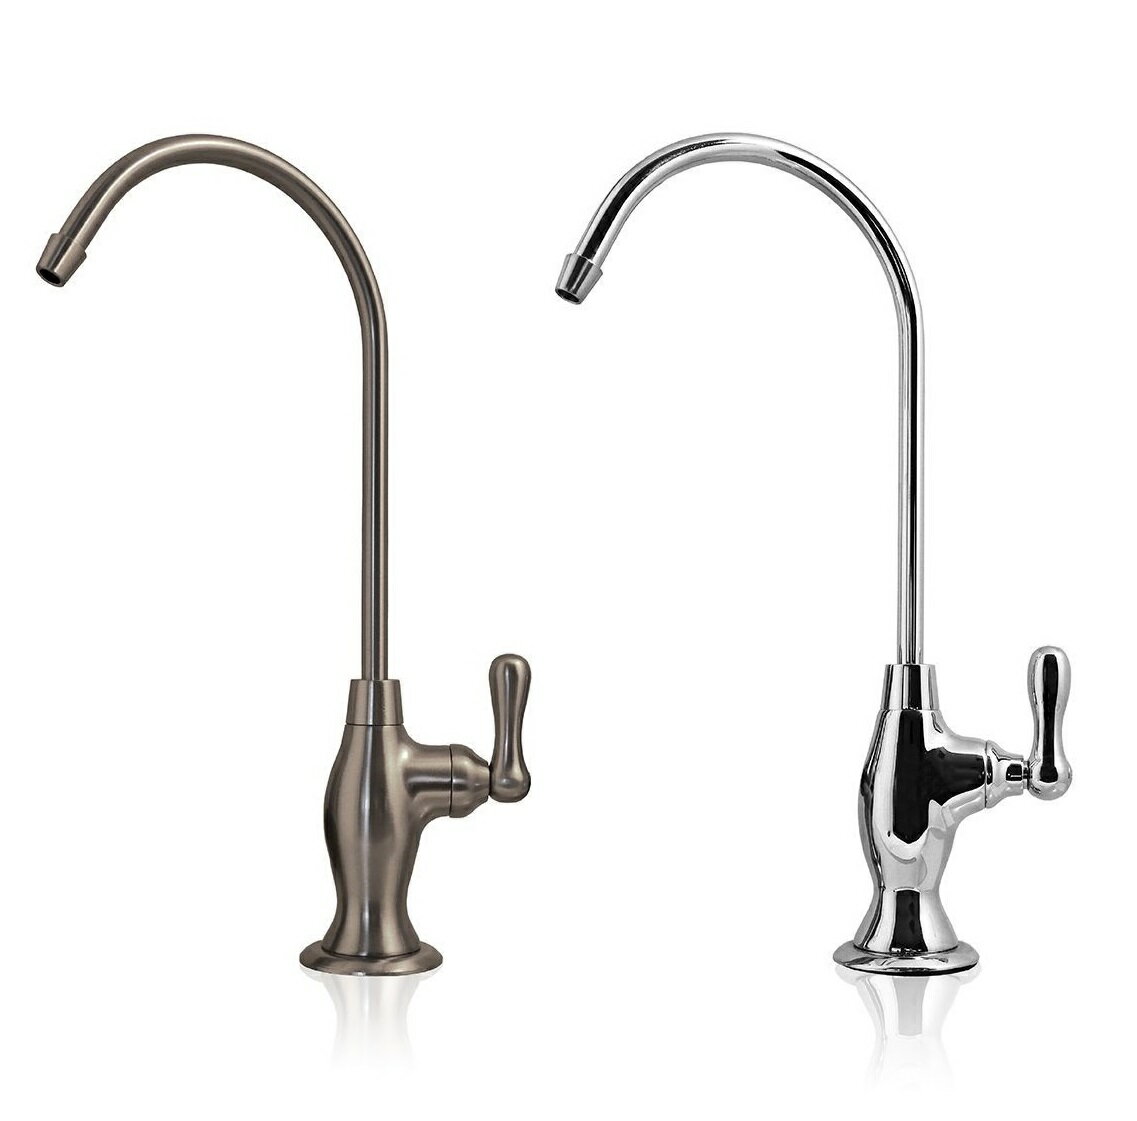 Express Water Express Water Deluxe Faucet Drinking Water